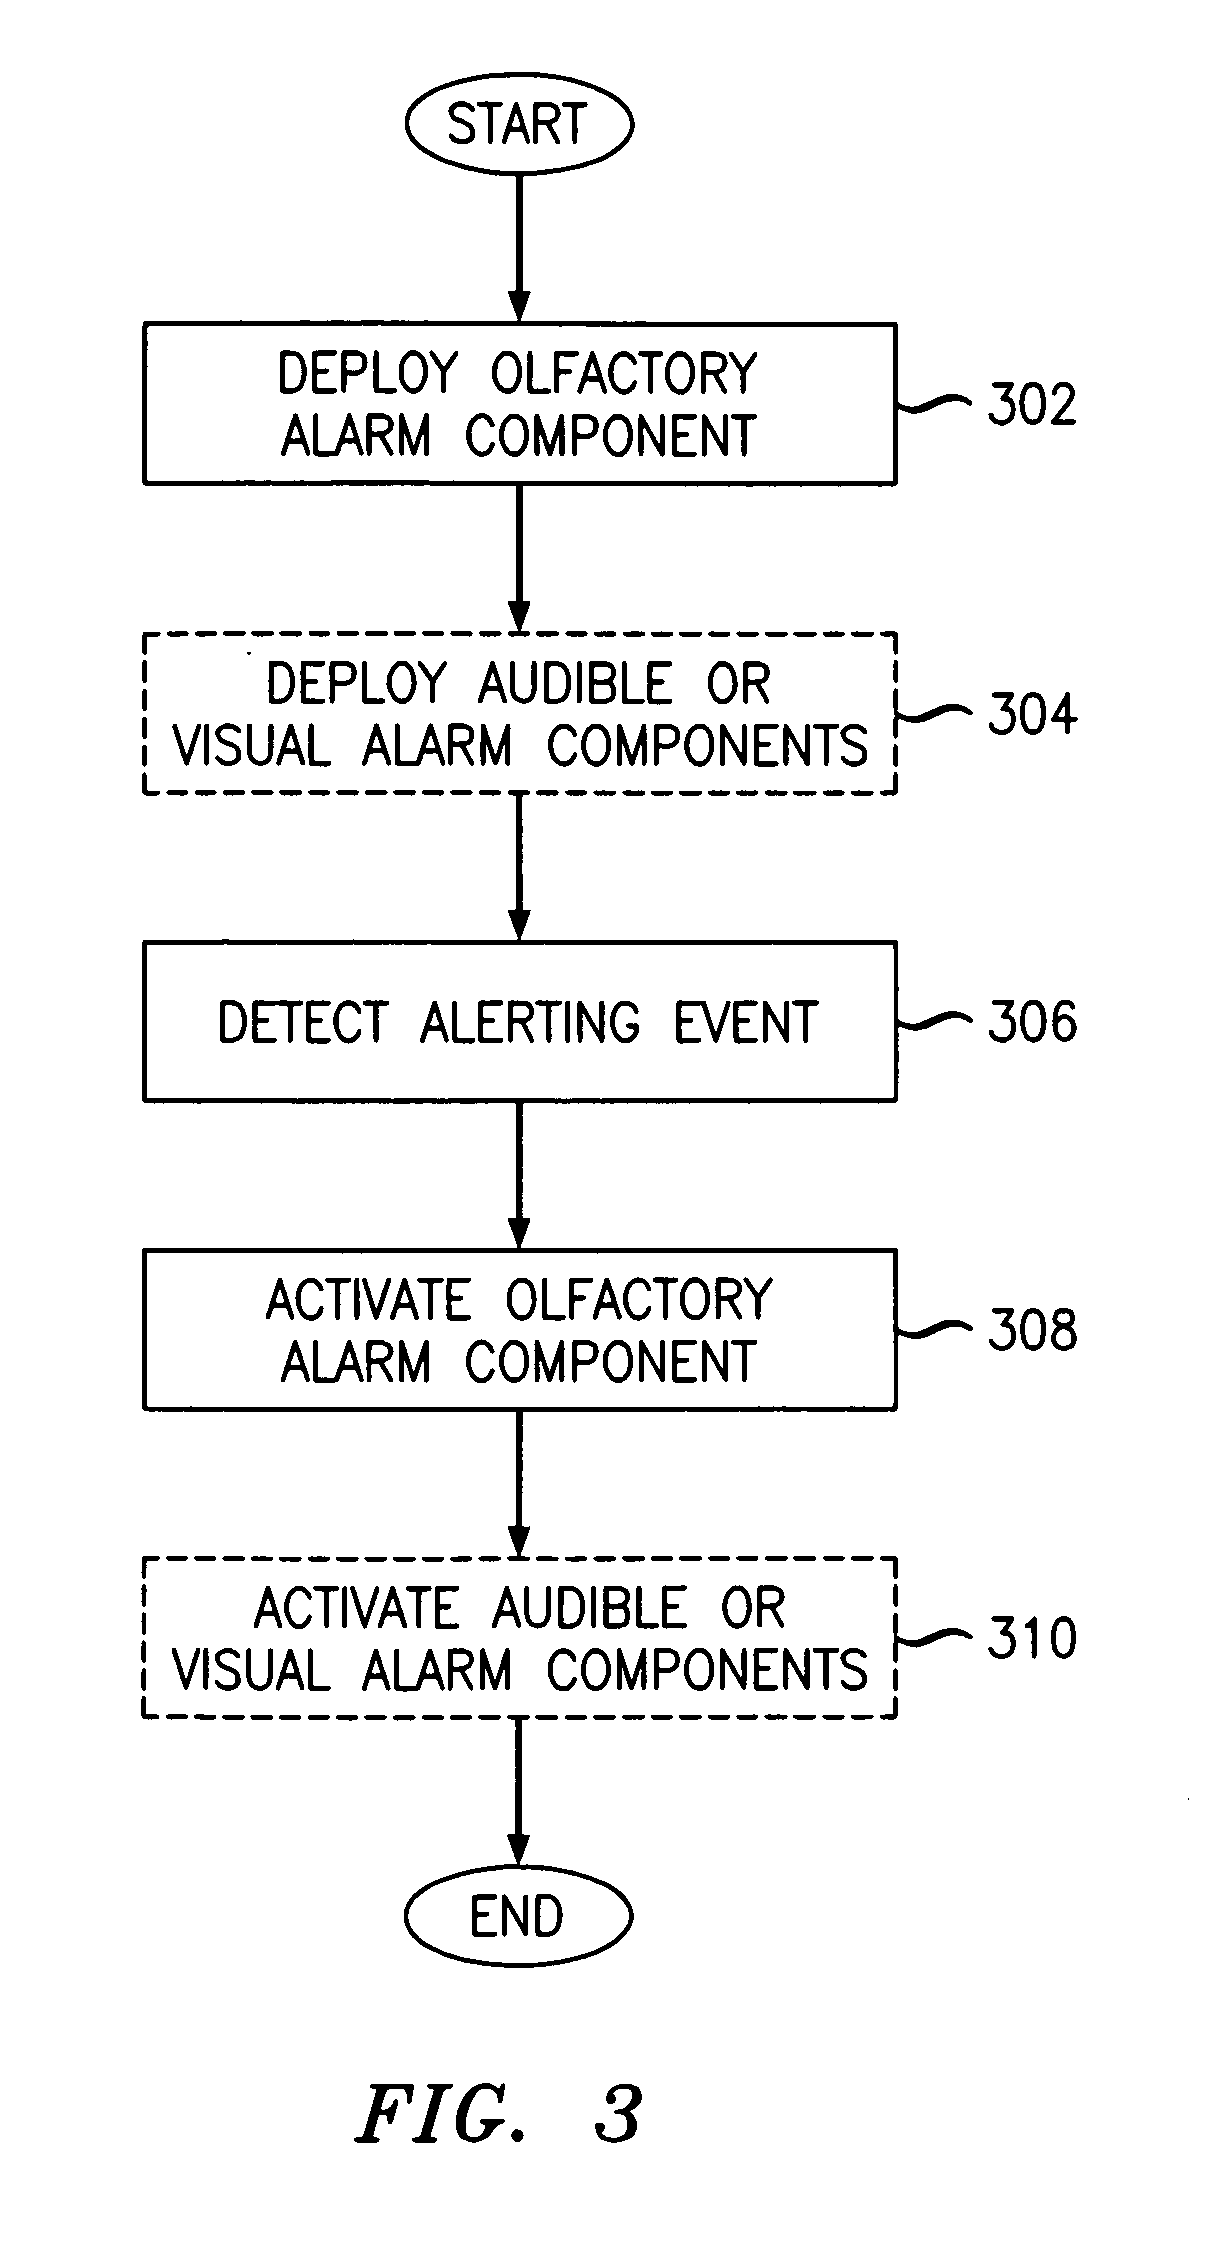 Alarm scheme with olfactory alerting component